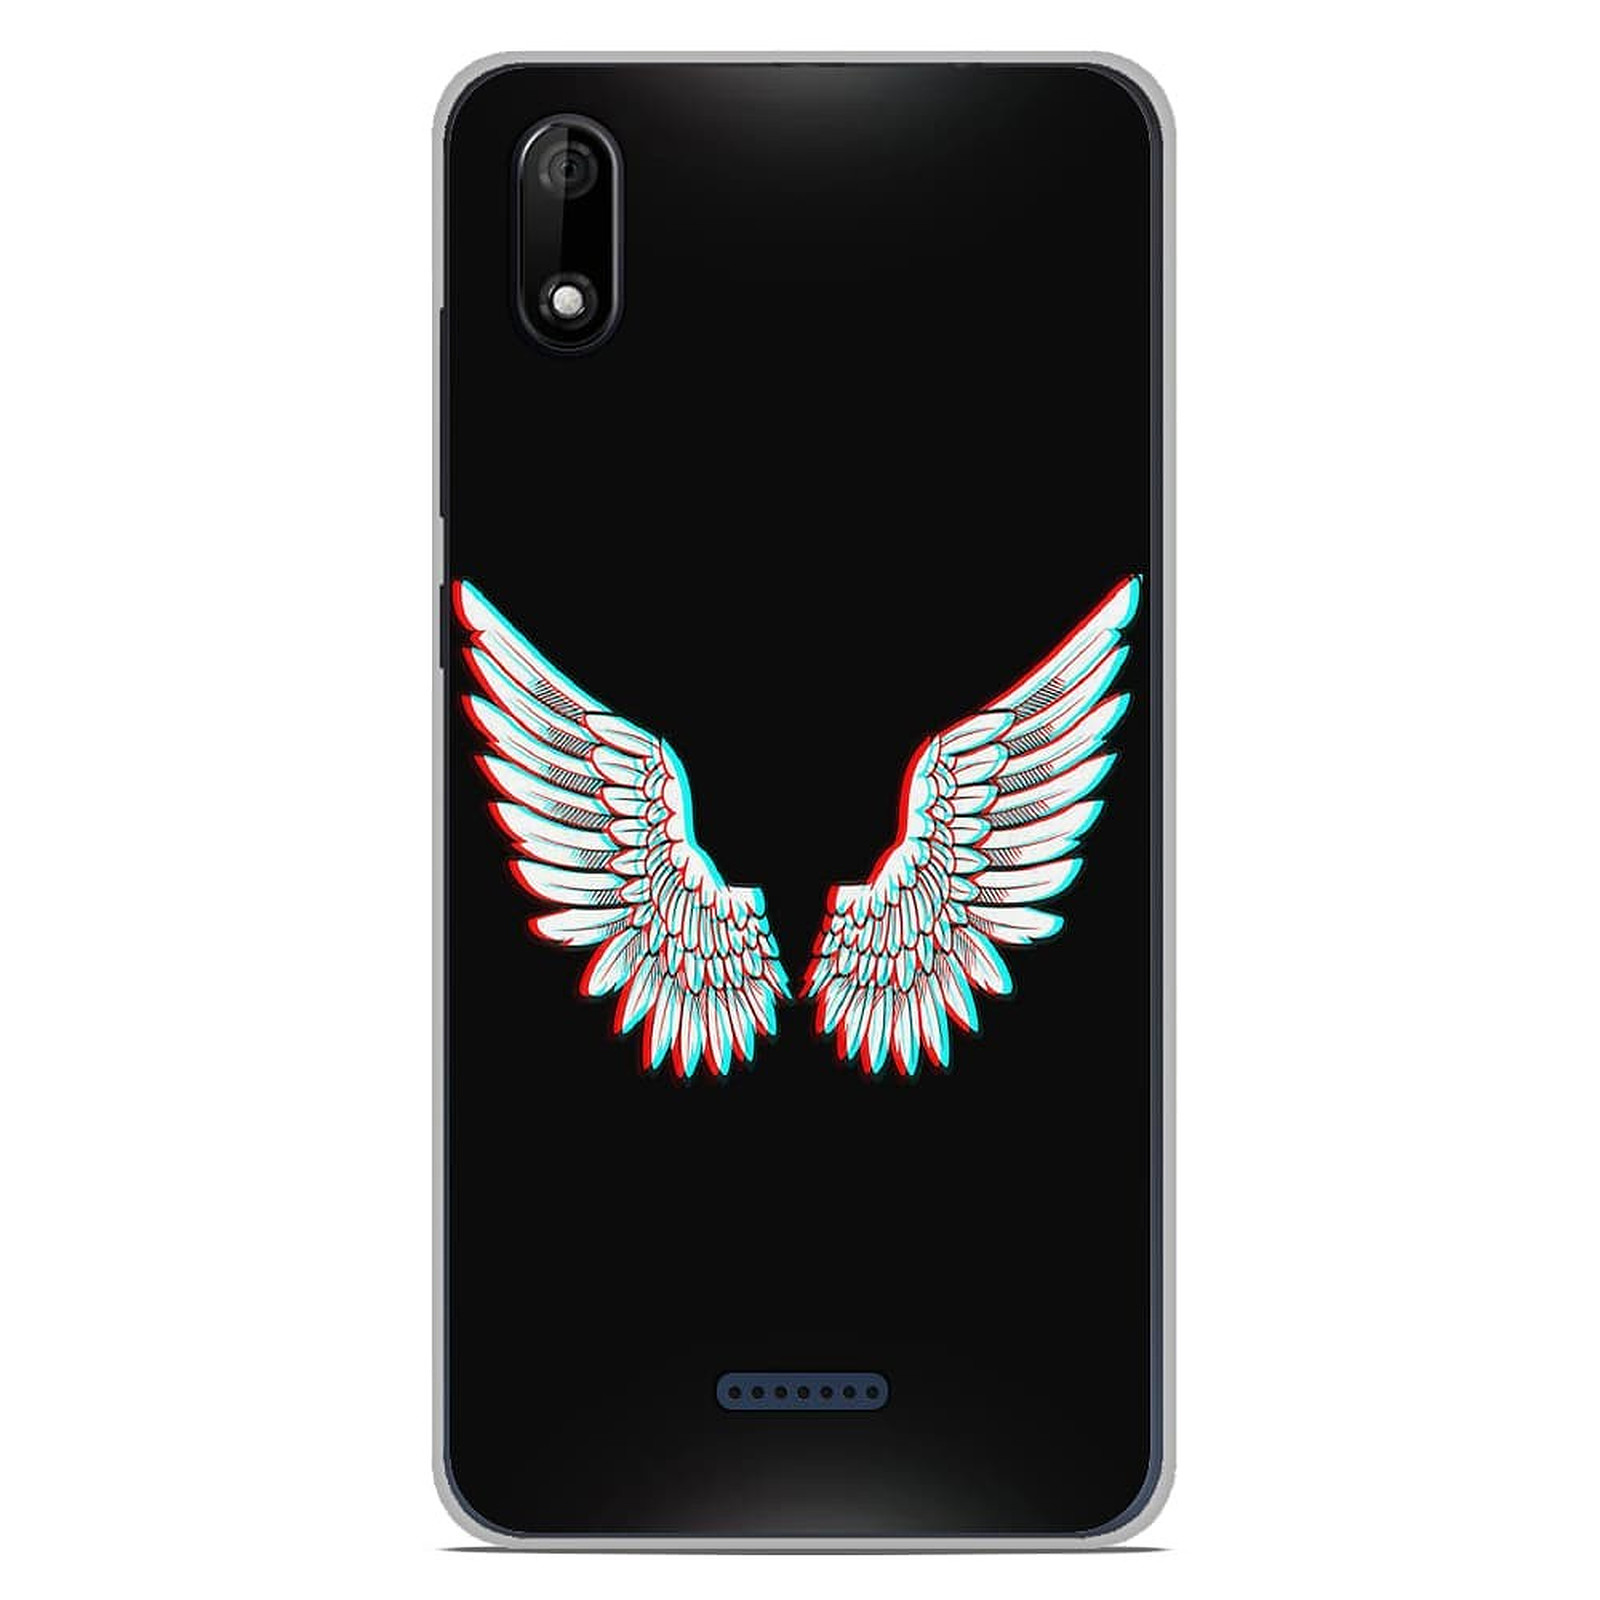 1001 Coques Coque silicone gel Wiko Y50 motif Ailes d'Ange - Coque telephone 1001Coques